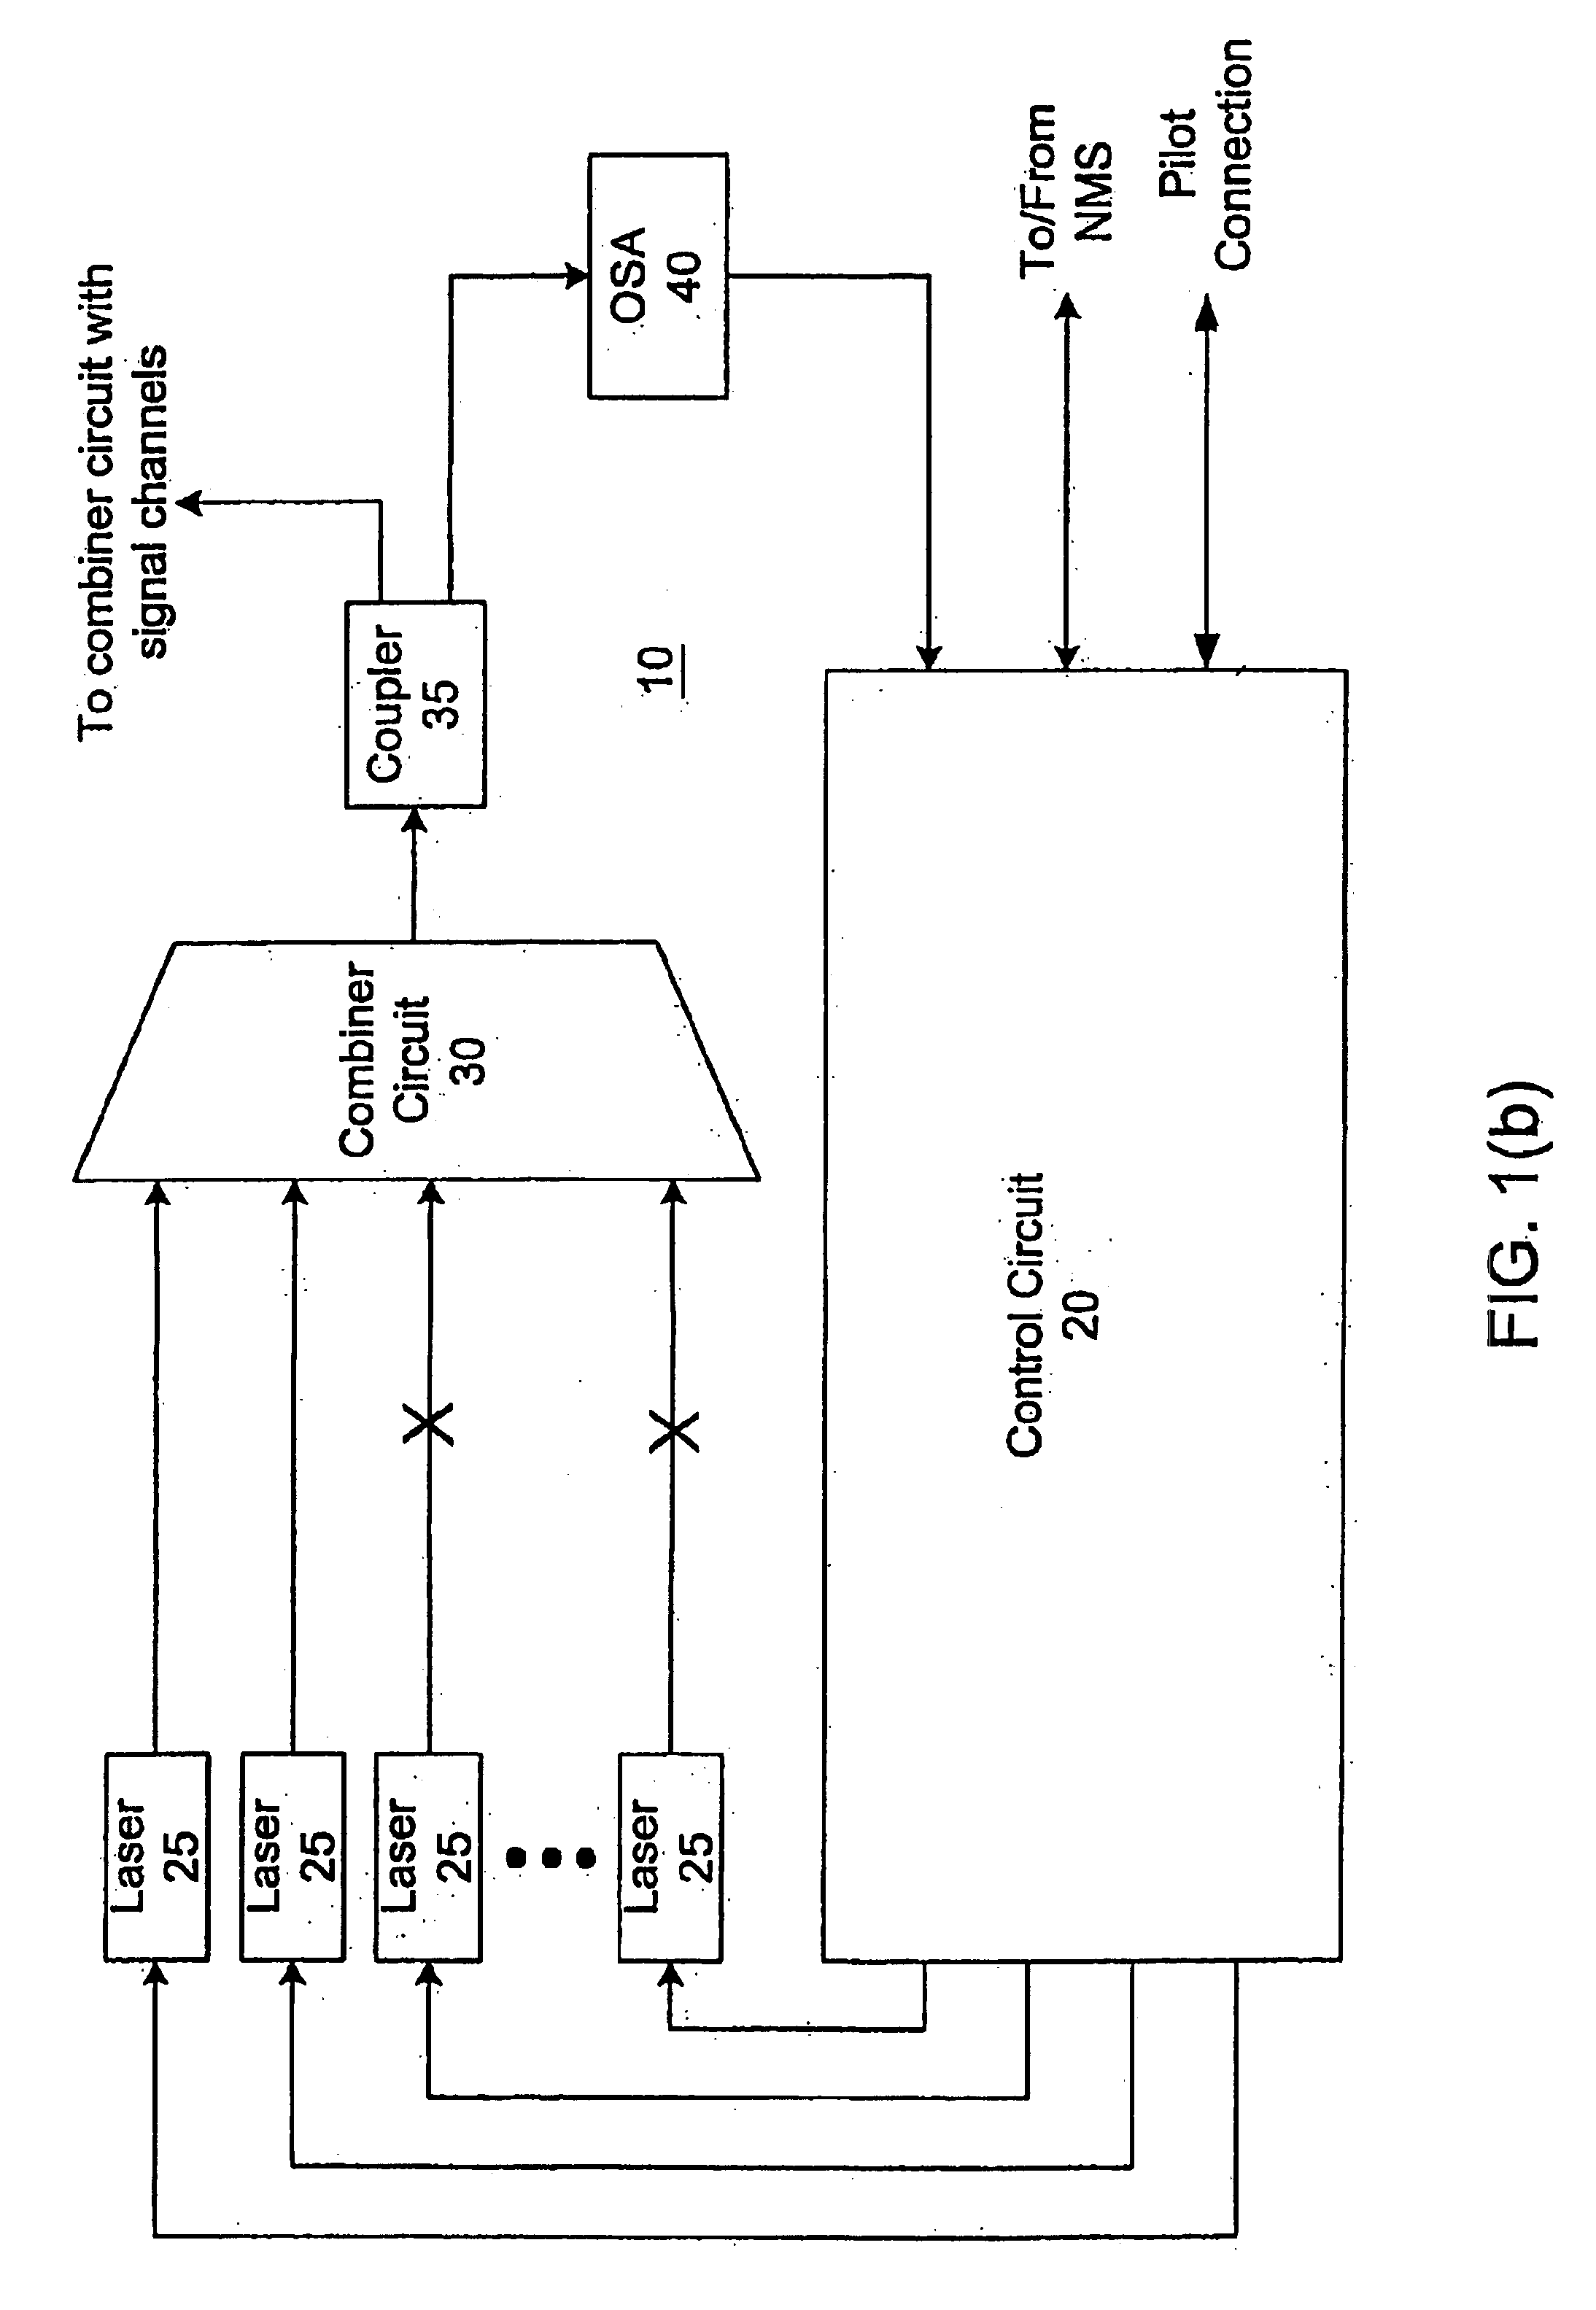 Terminals having sub-band substitute signal control in optical communication systems